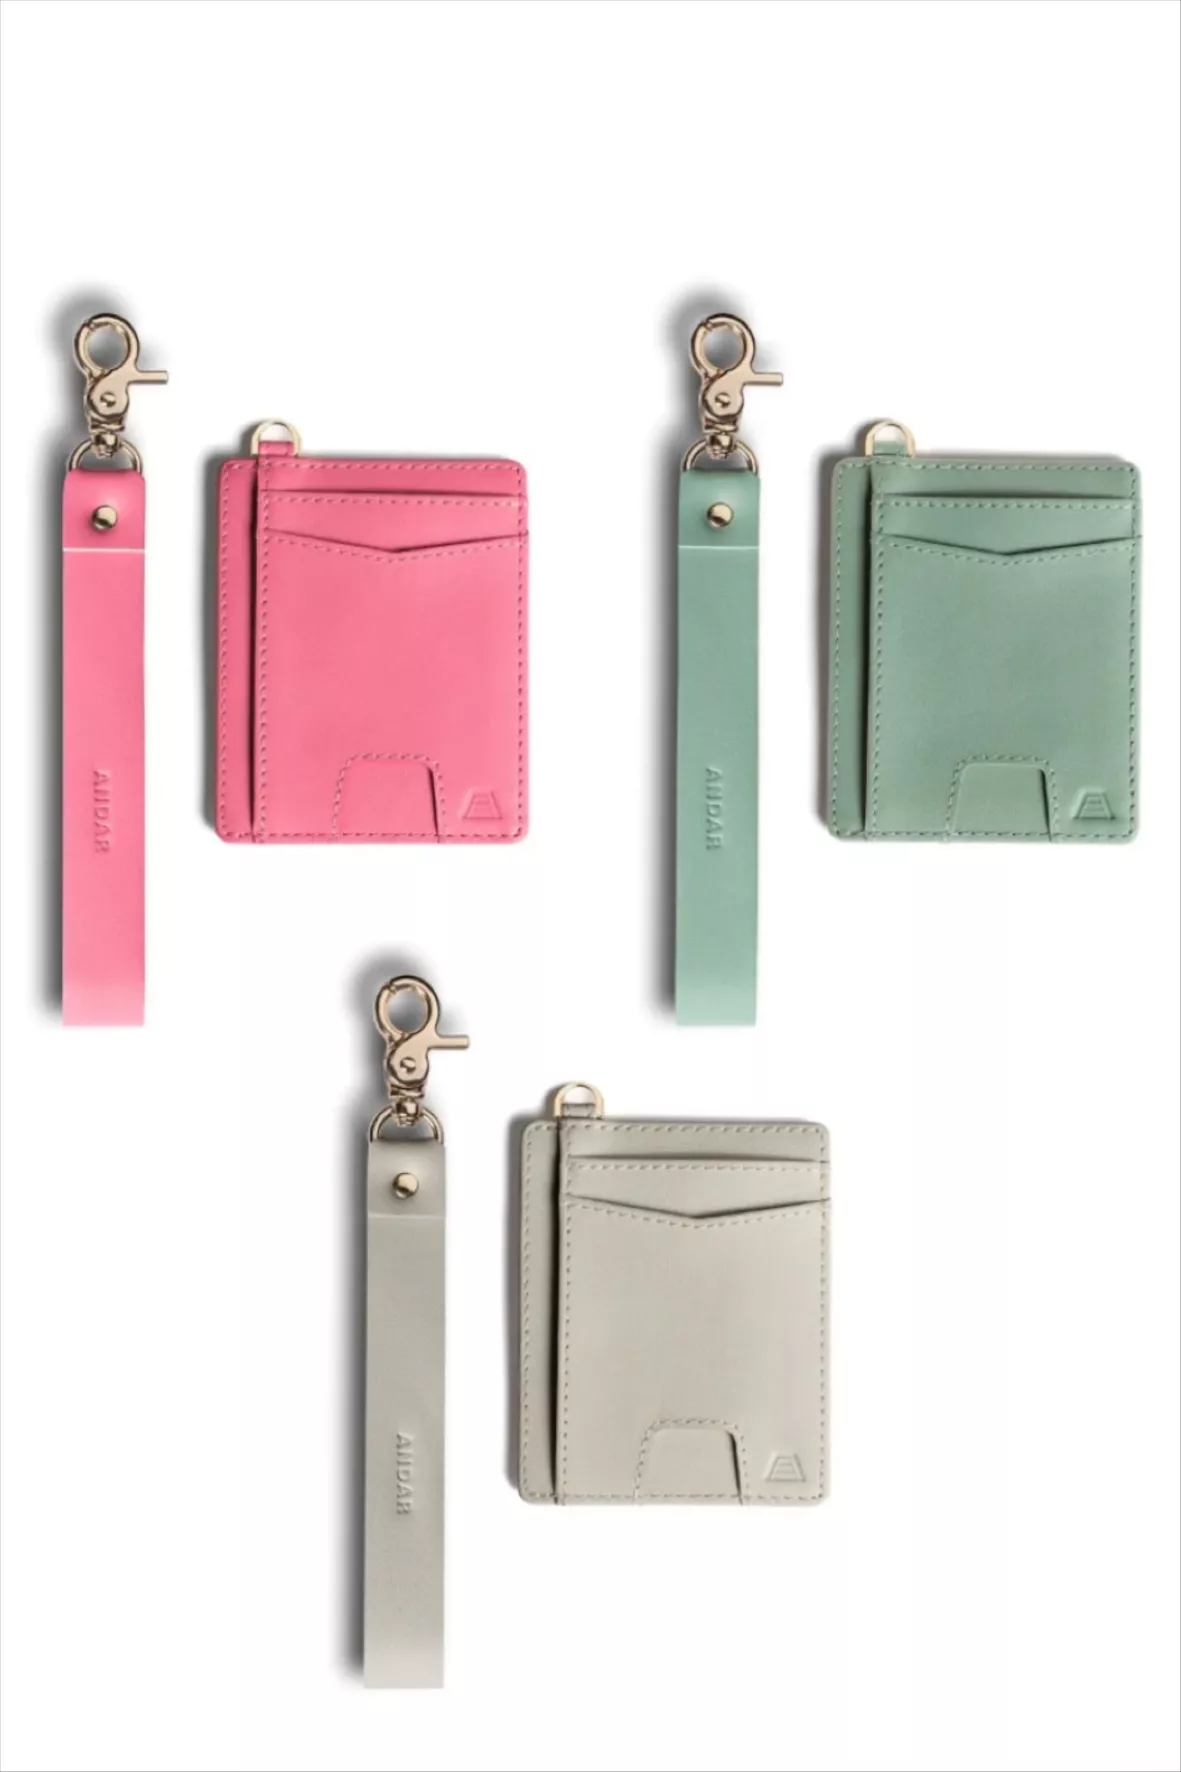 Keychain Wallet, The Denner Wallet